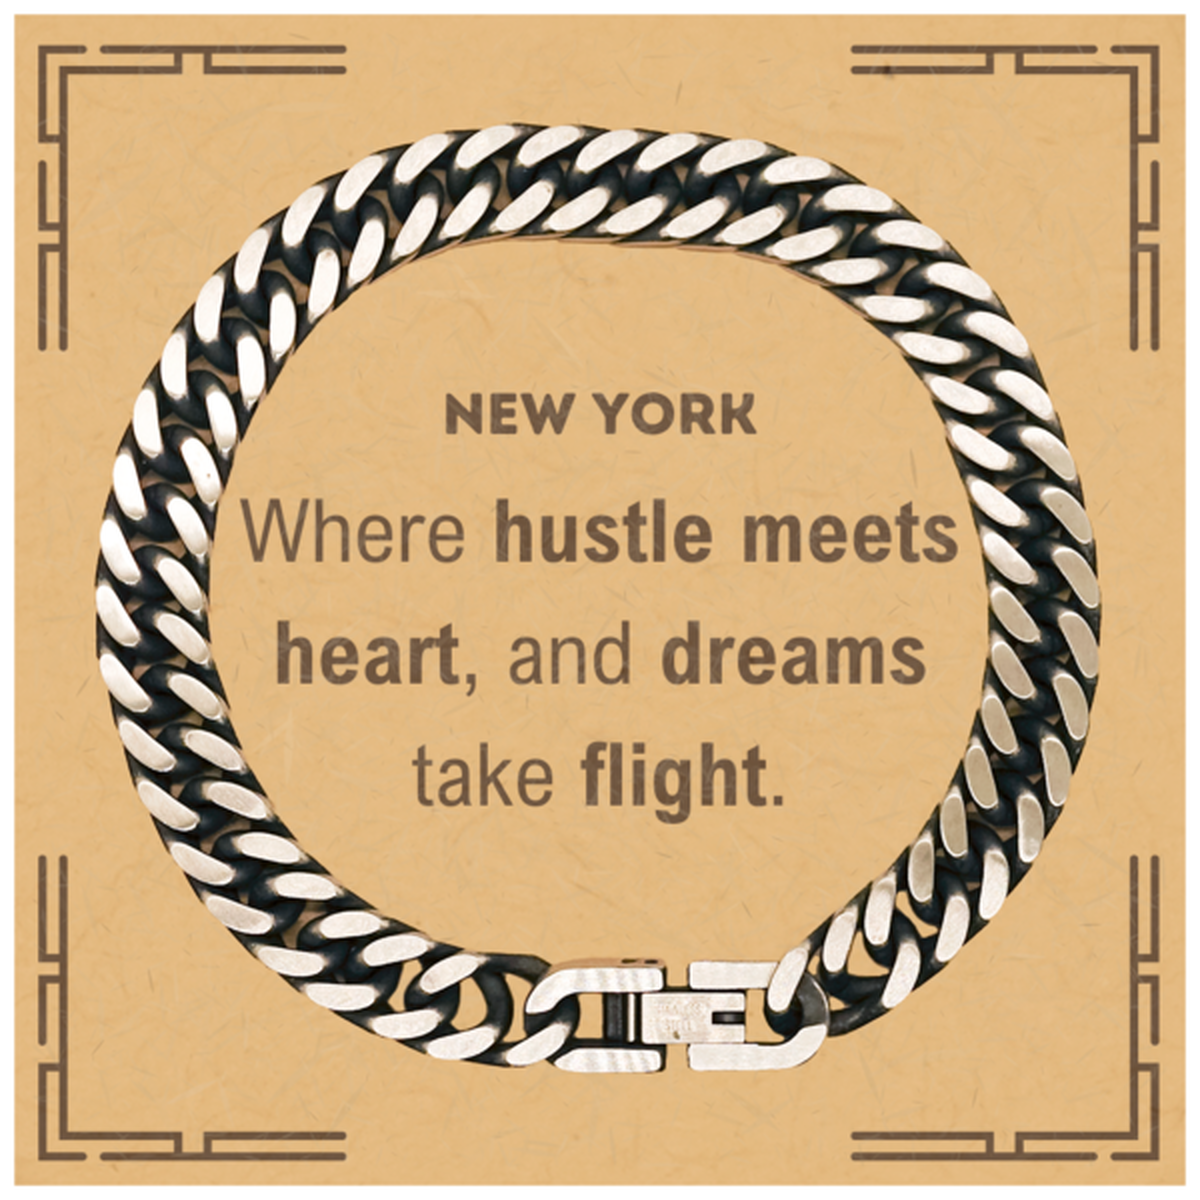 New York: Where hustle meets heart, and dreams take flight, New York Card Gifts, Proud New York Christmas Birthday New York Cuban Link Chain Bracelet, New York State People, Men, Women, Friends